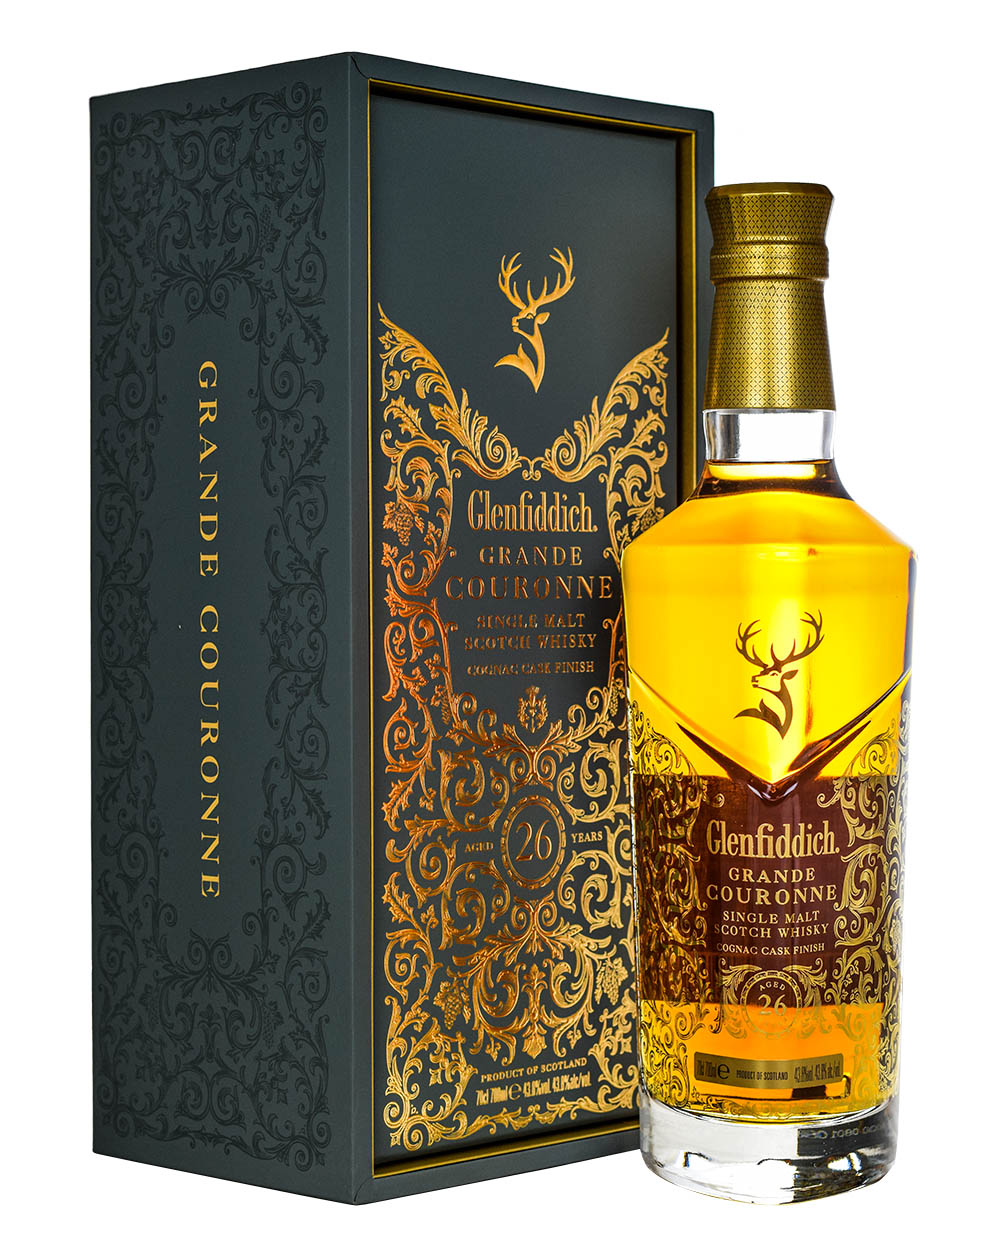 Glenfiddich Grande Couronne 26 Years Old Box Musthave Malts MHM